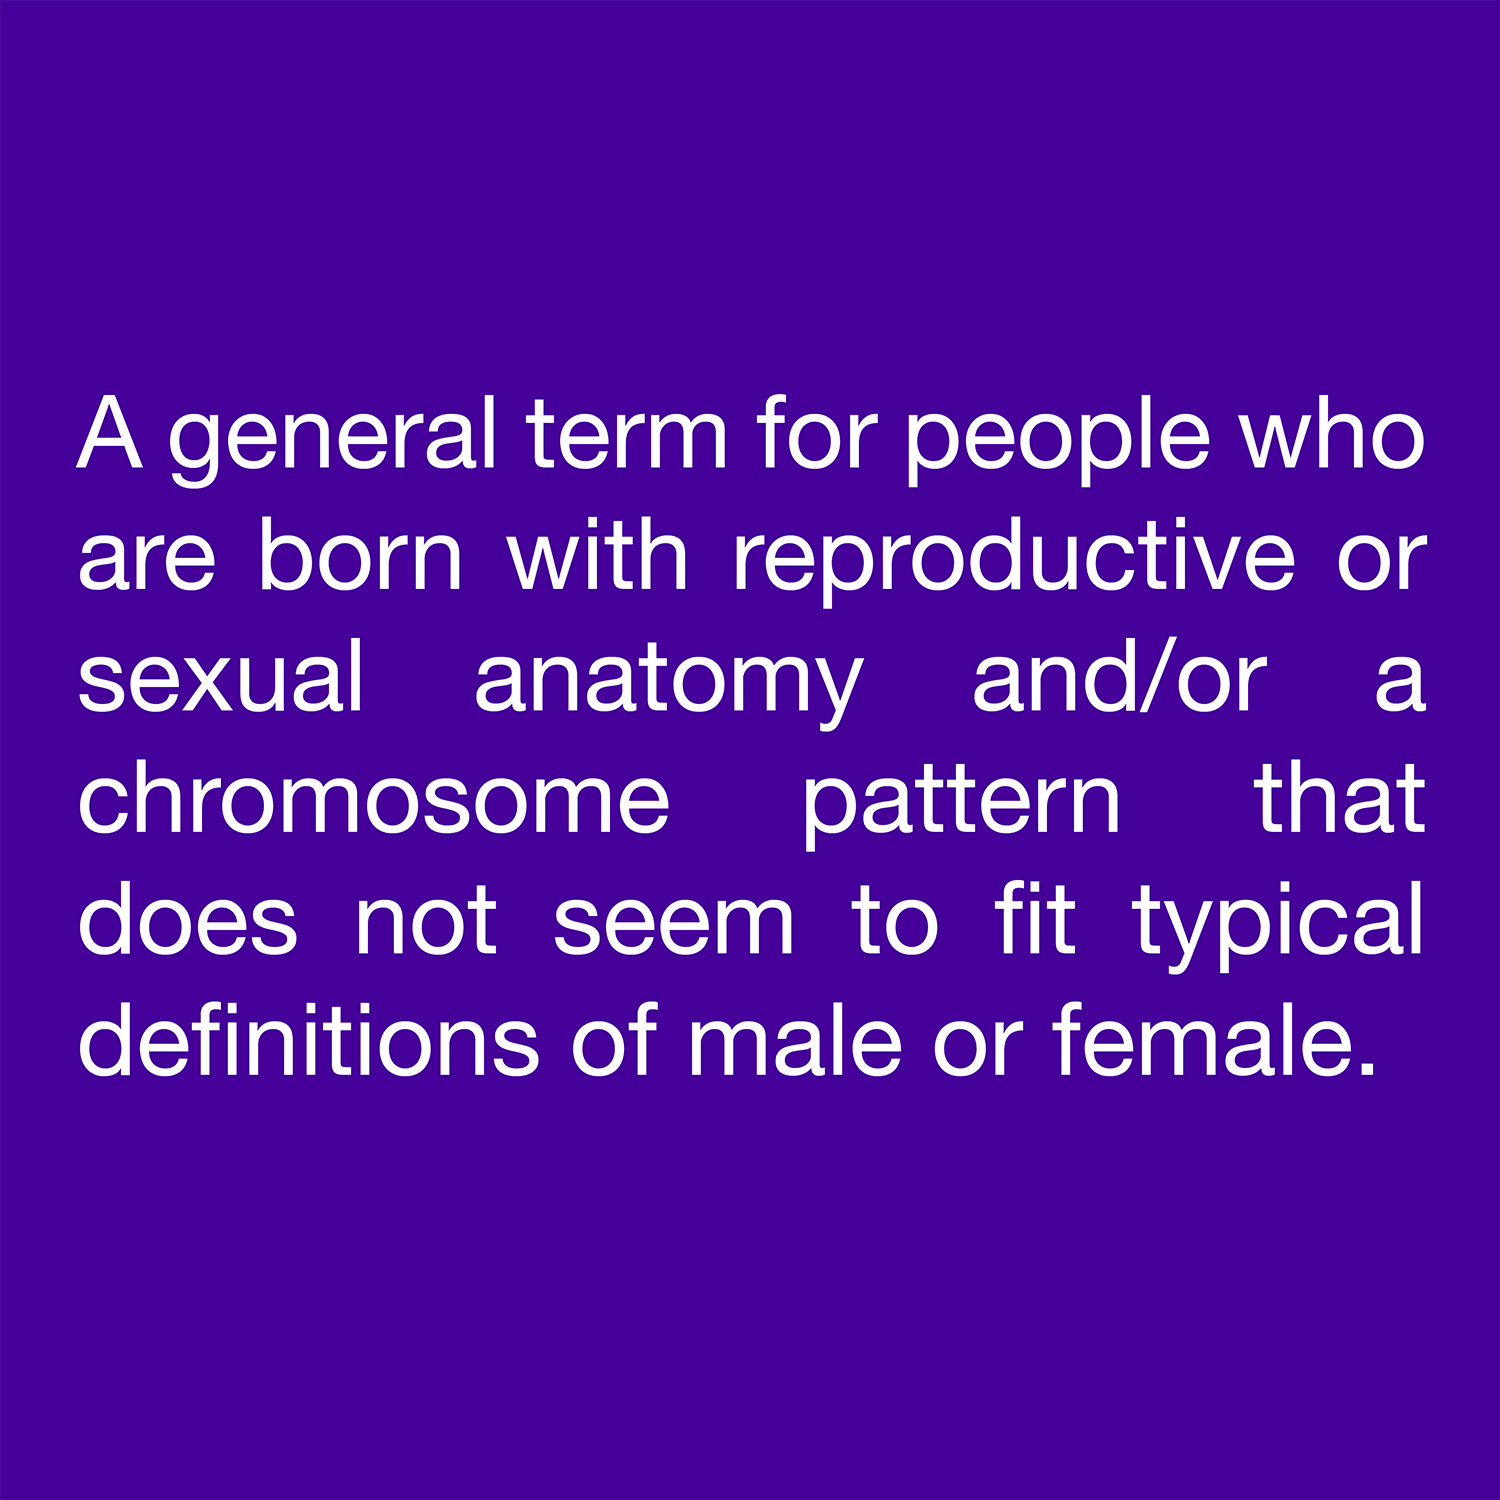  A general term for people who are born with reproductive or sexual anatomy and/or a chromosome pattern that does not seem to fit typical definitions of male or female. 